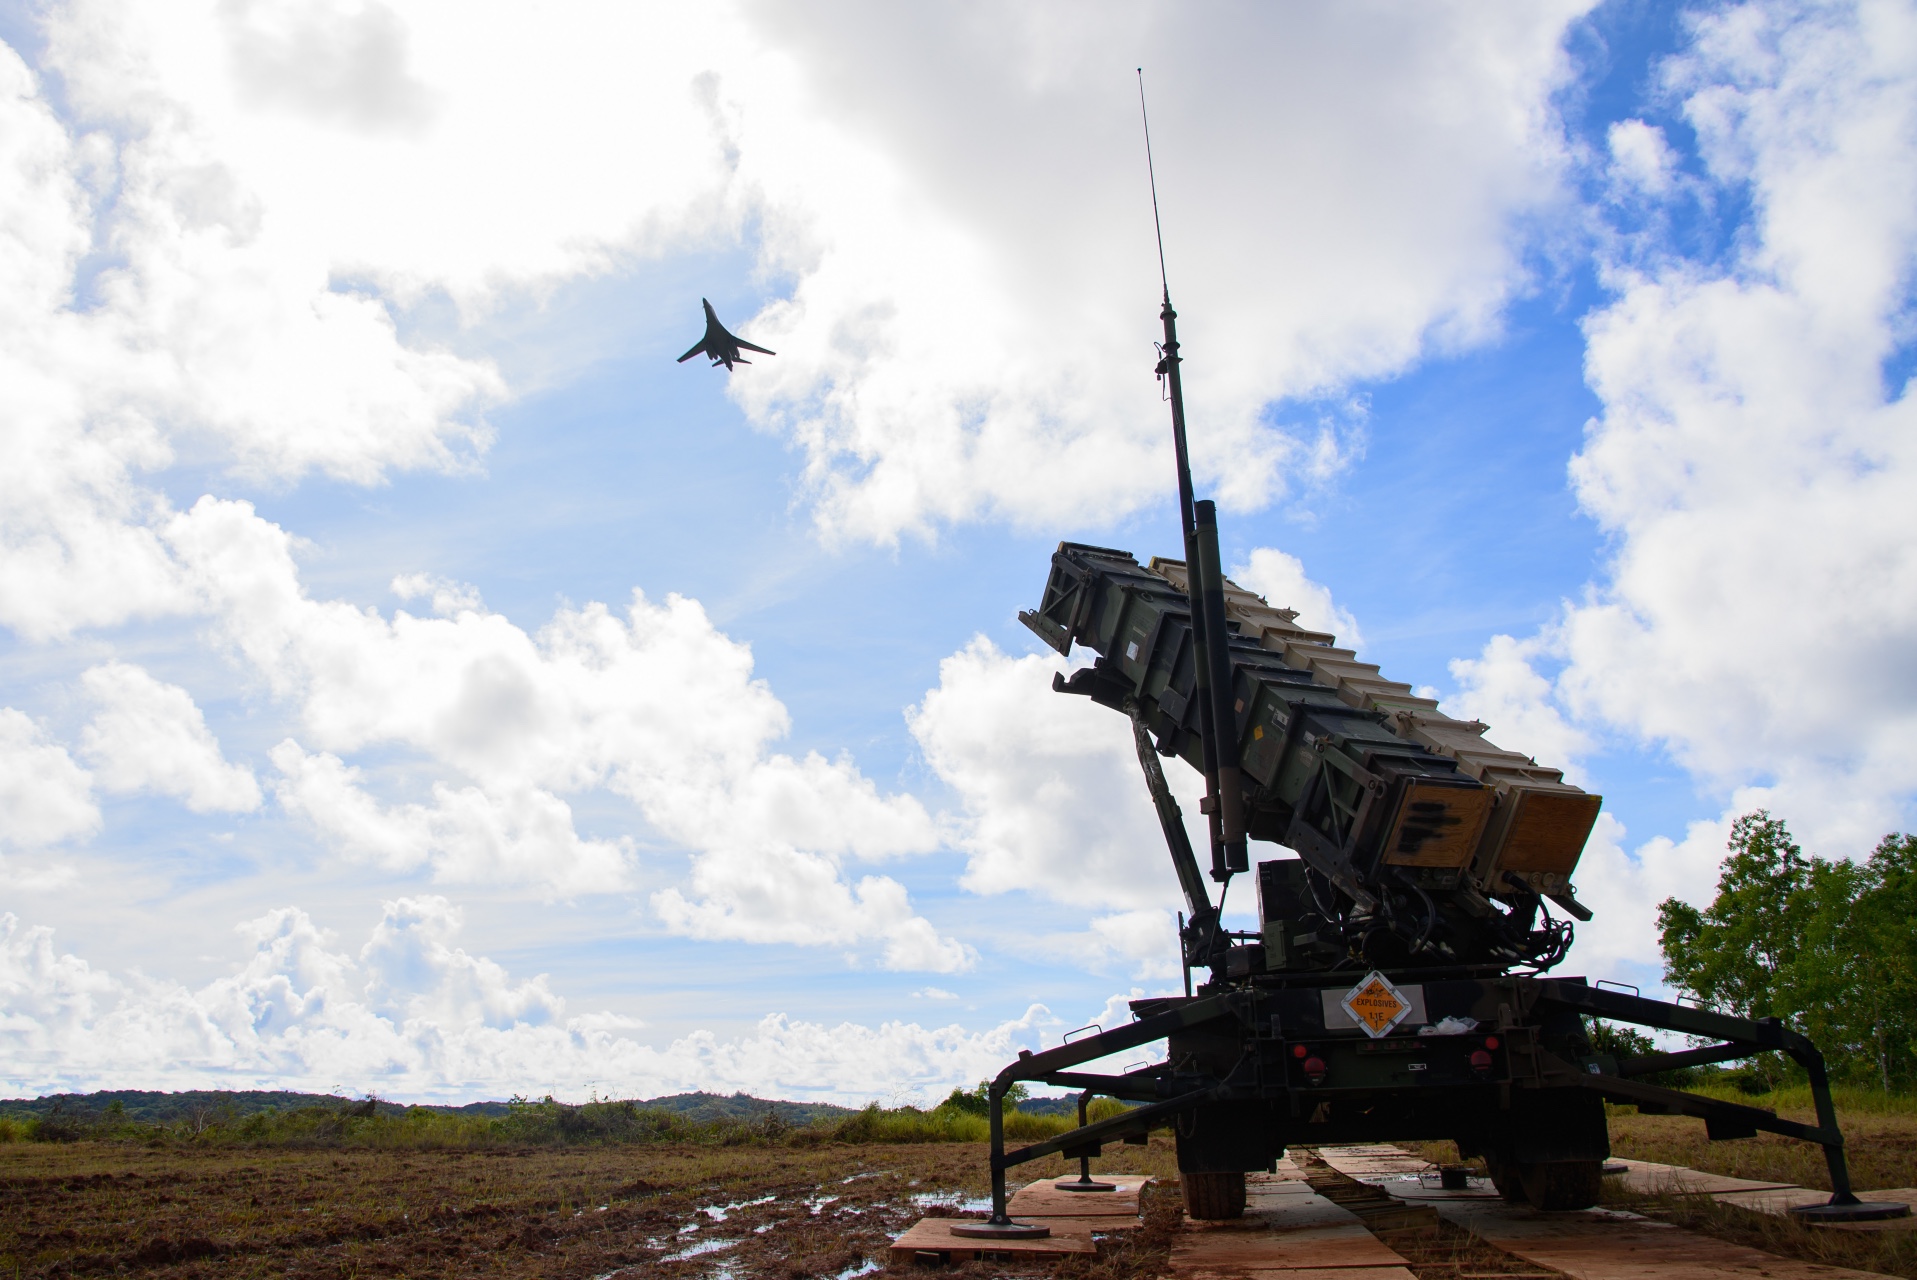 A U.S. Air Force B-1B Lancer assigned to the 34th Expeditionary Bomb Squadron flies over a MIM-104 Patriot missile launcher assigned to the Charlie Battery, 1-1 Air Defense Artillery Battalion at Palau International Airport in support of Valiant Shield 22, June 12, 2022